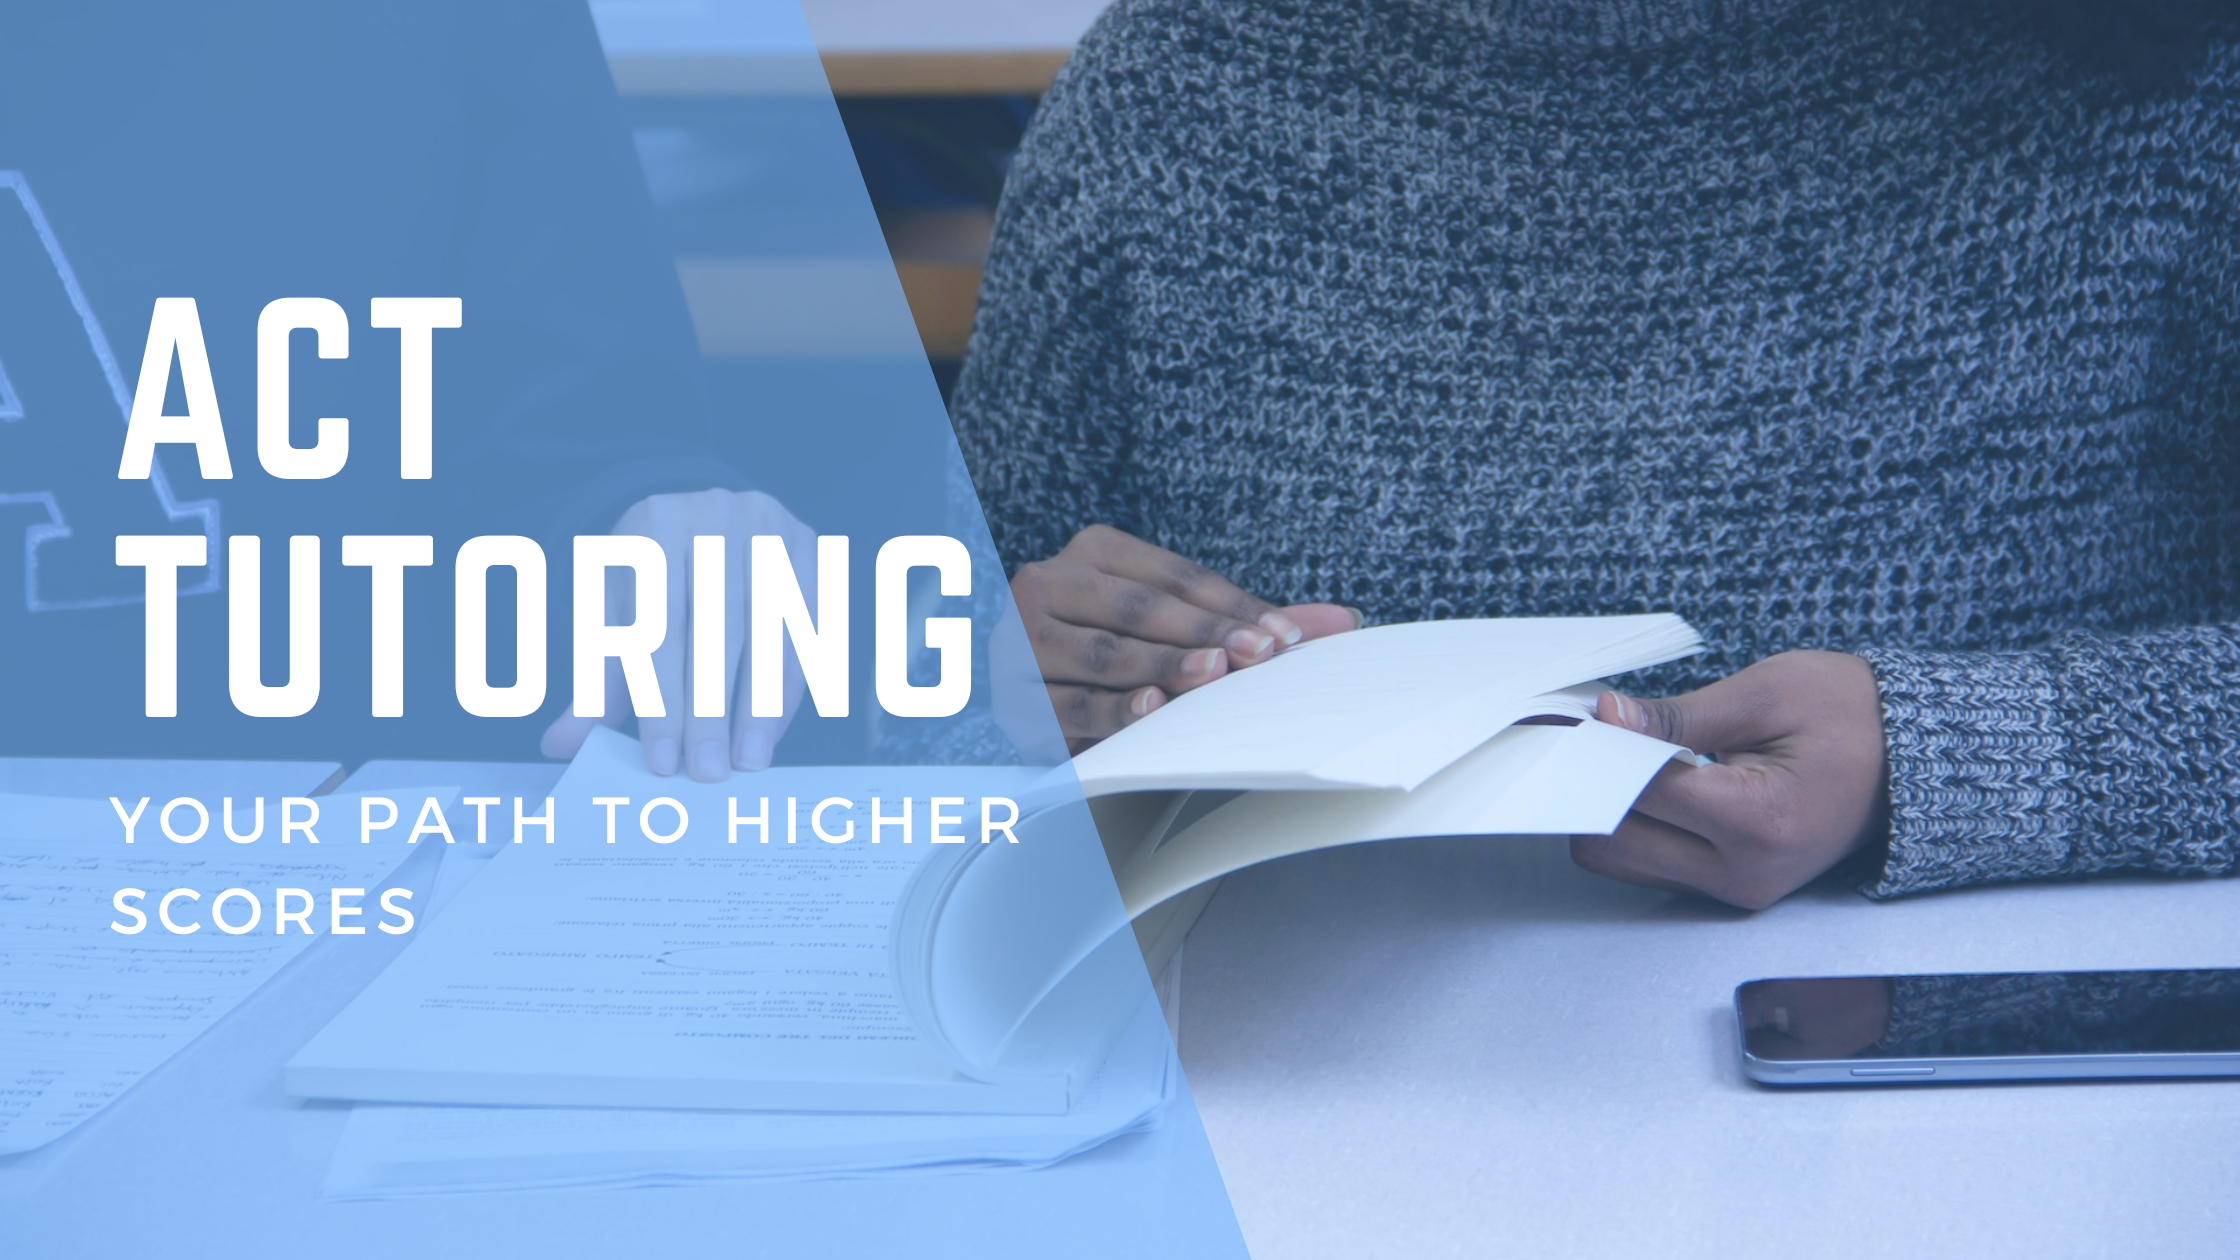 ACT tutoring Your path to higher scores and college success